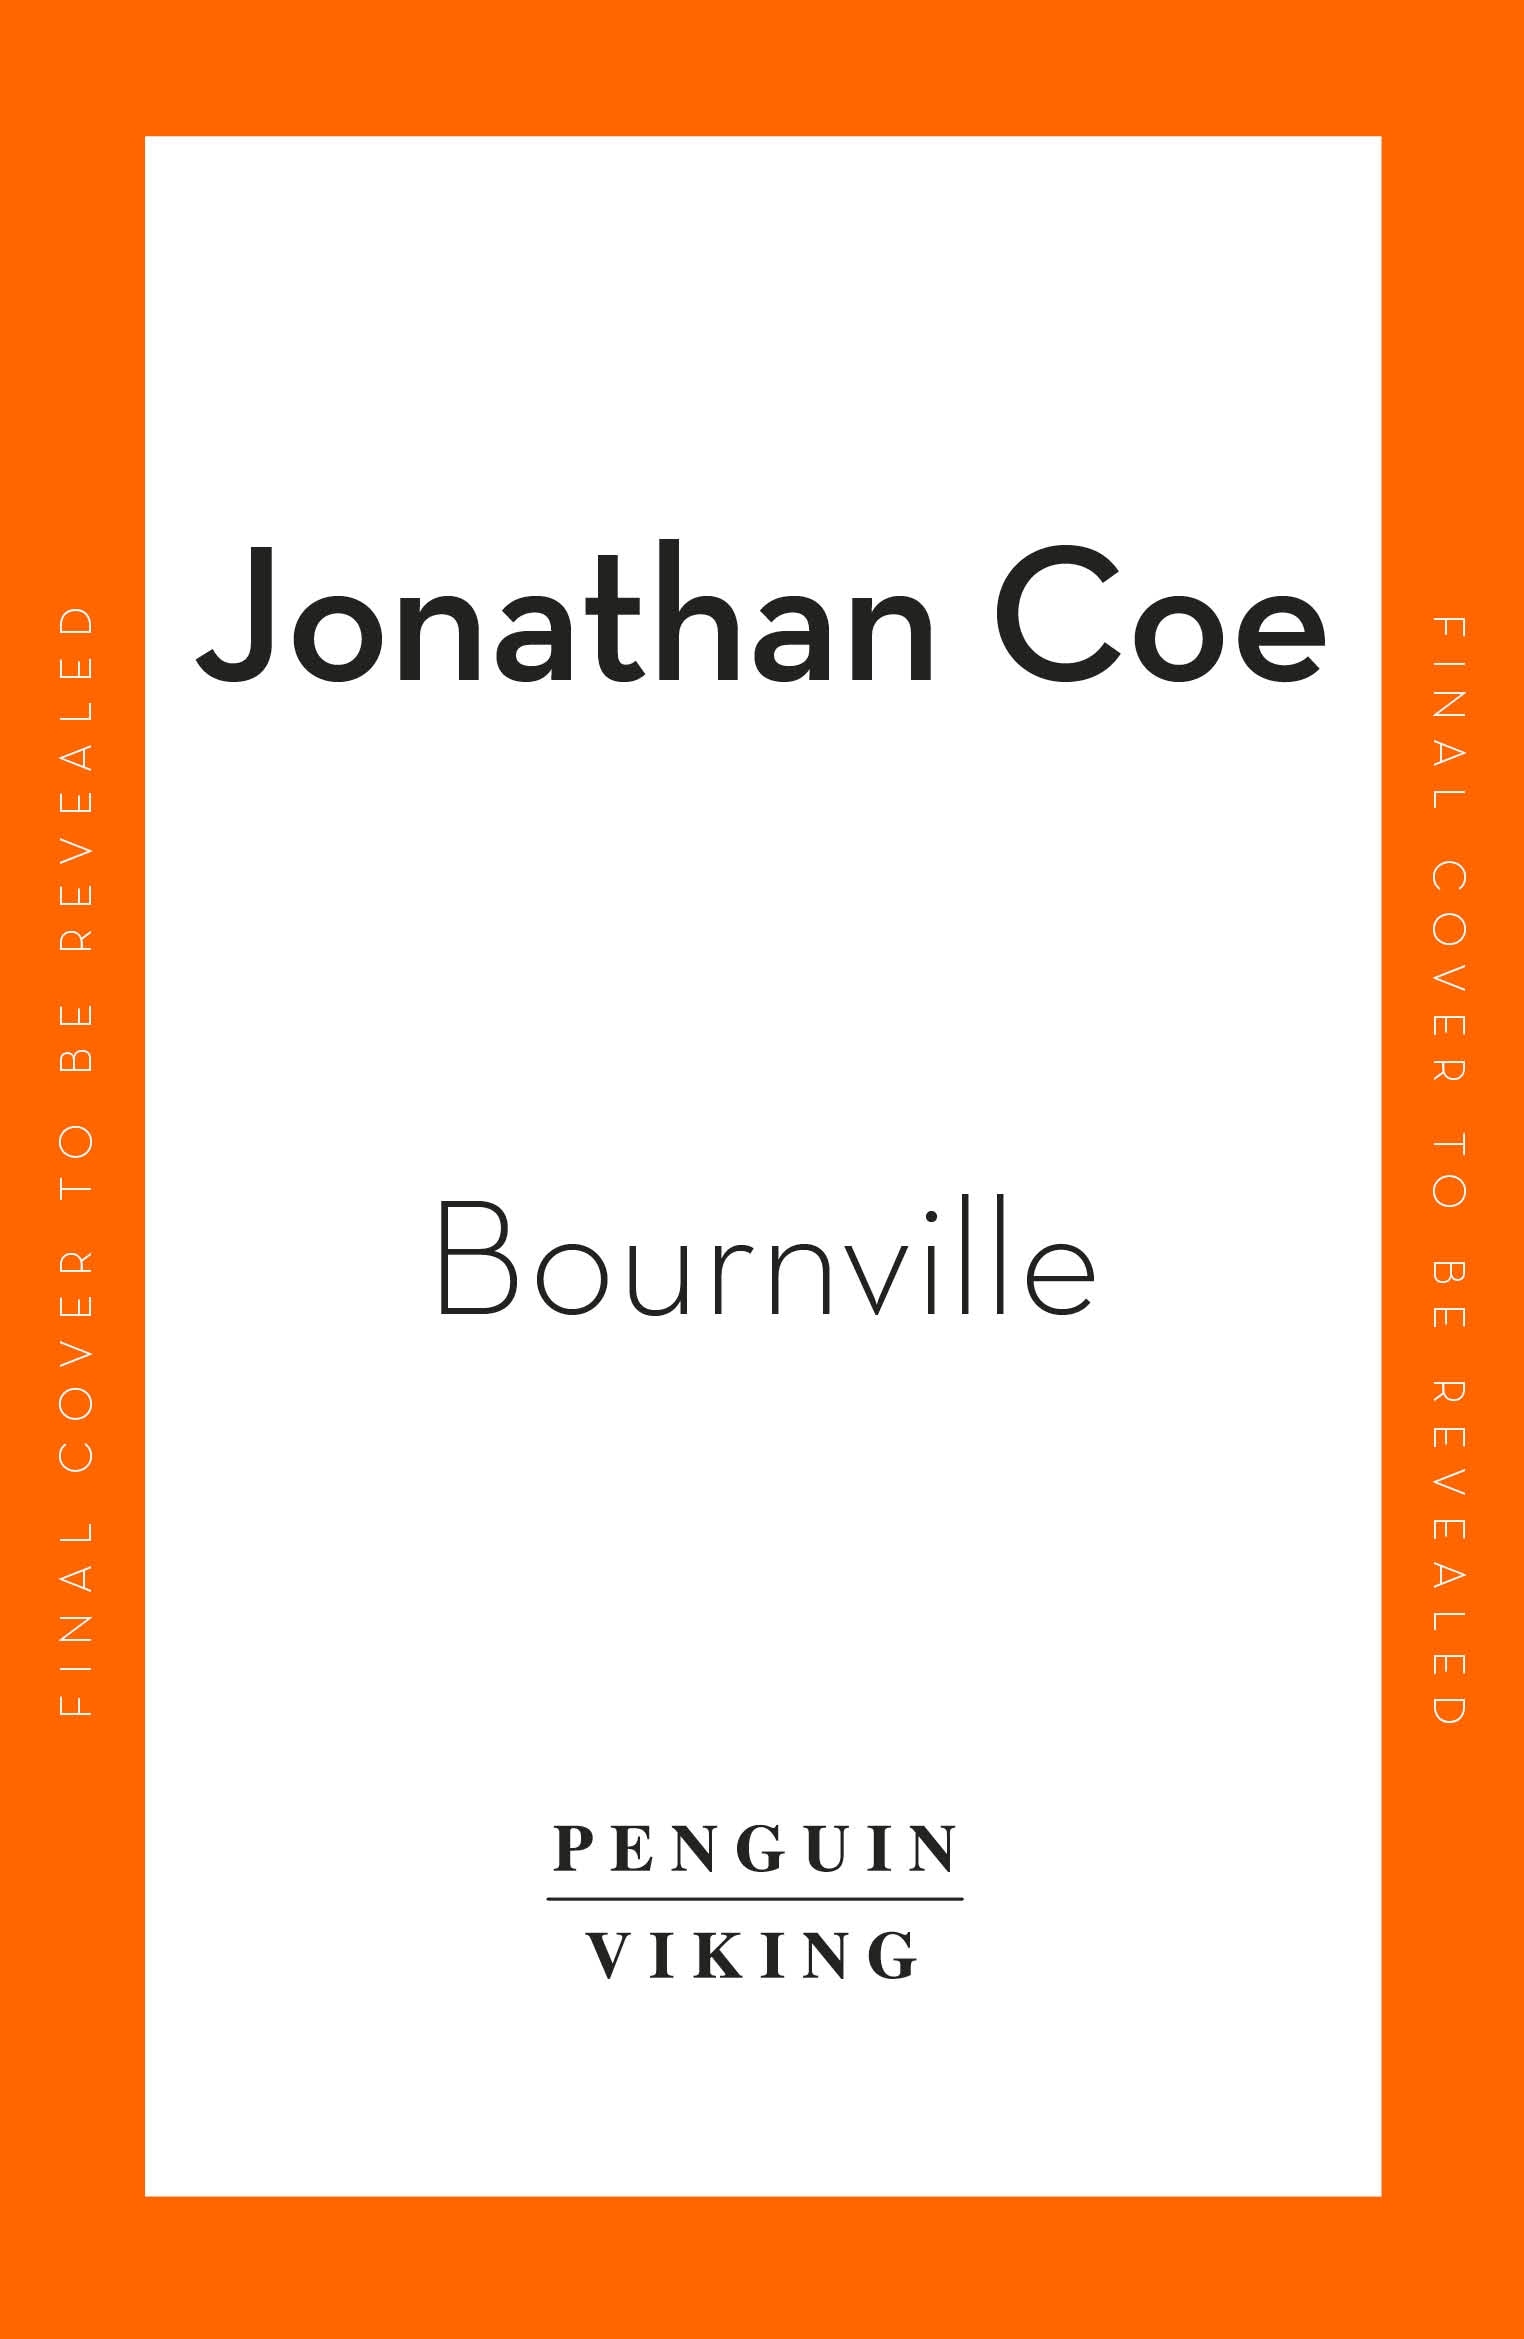 Book “Bournville” by Jonathan Coe — November 3, 2022